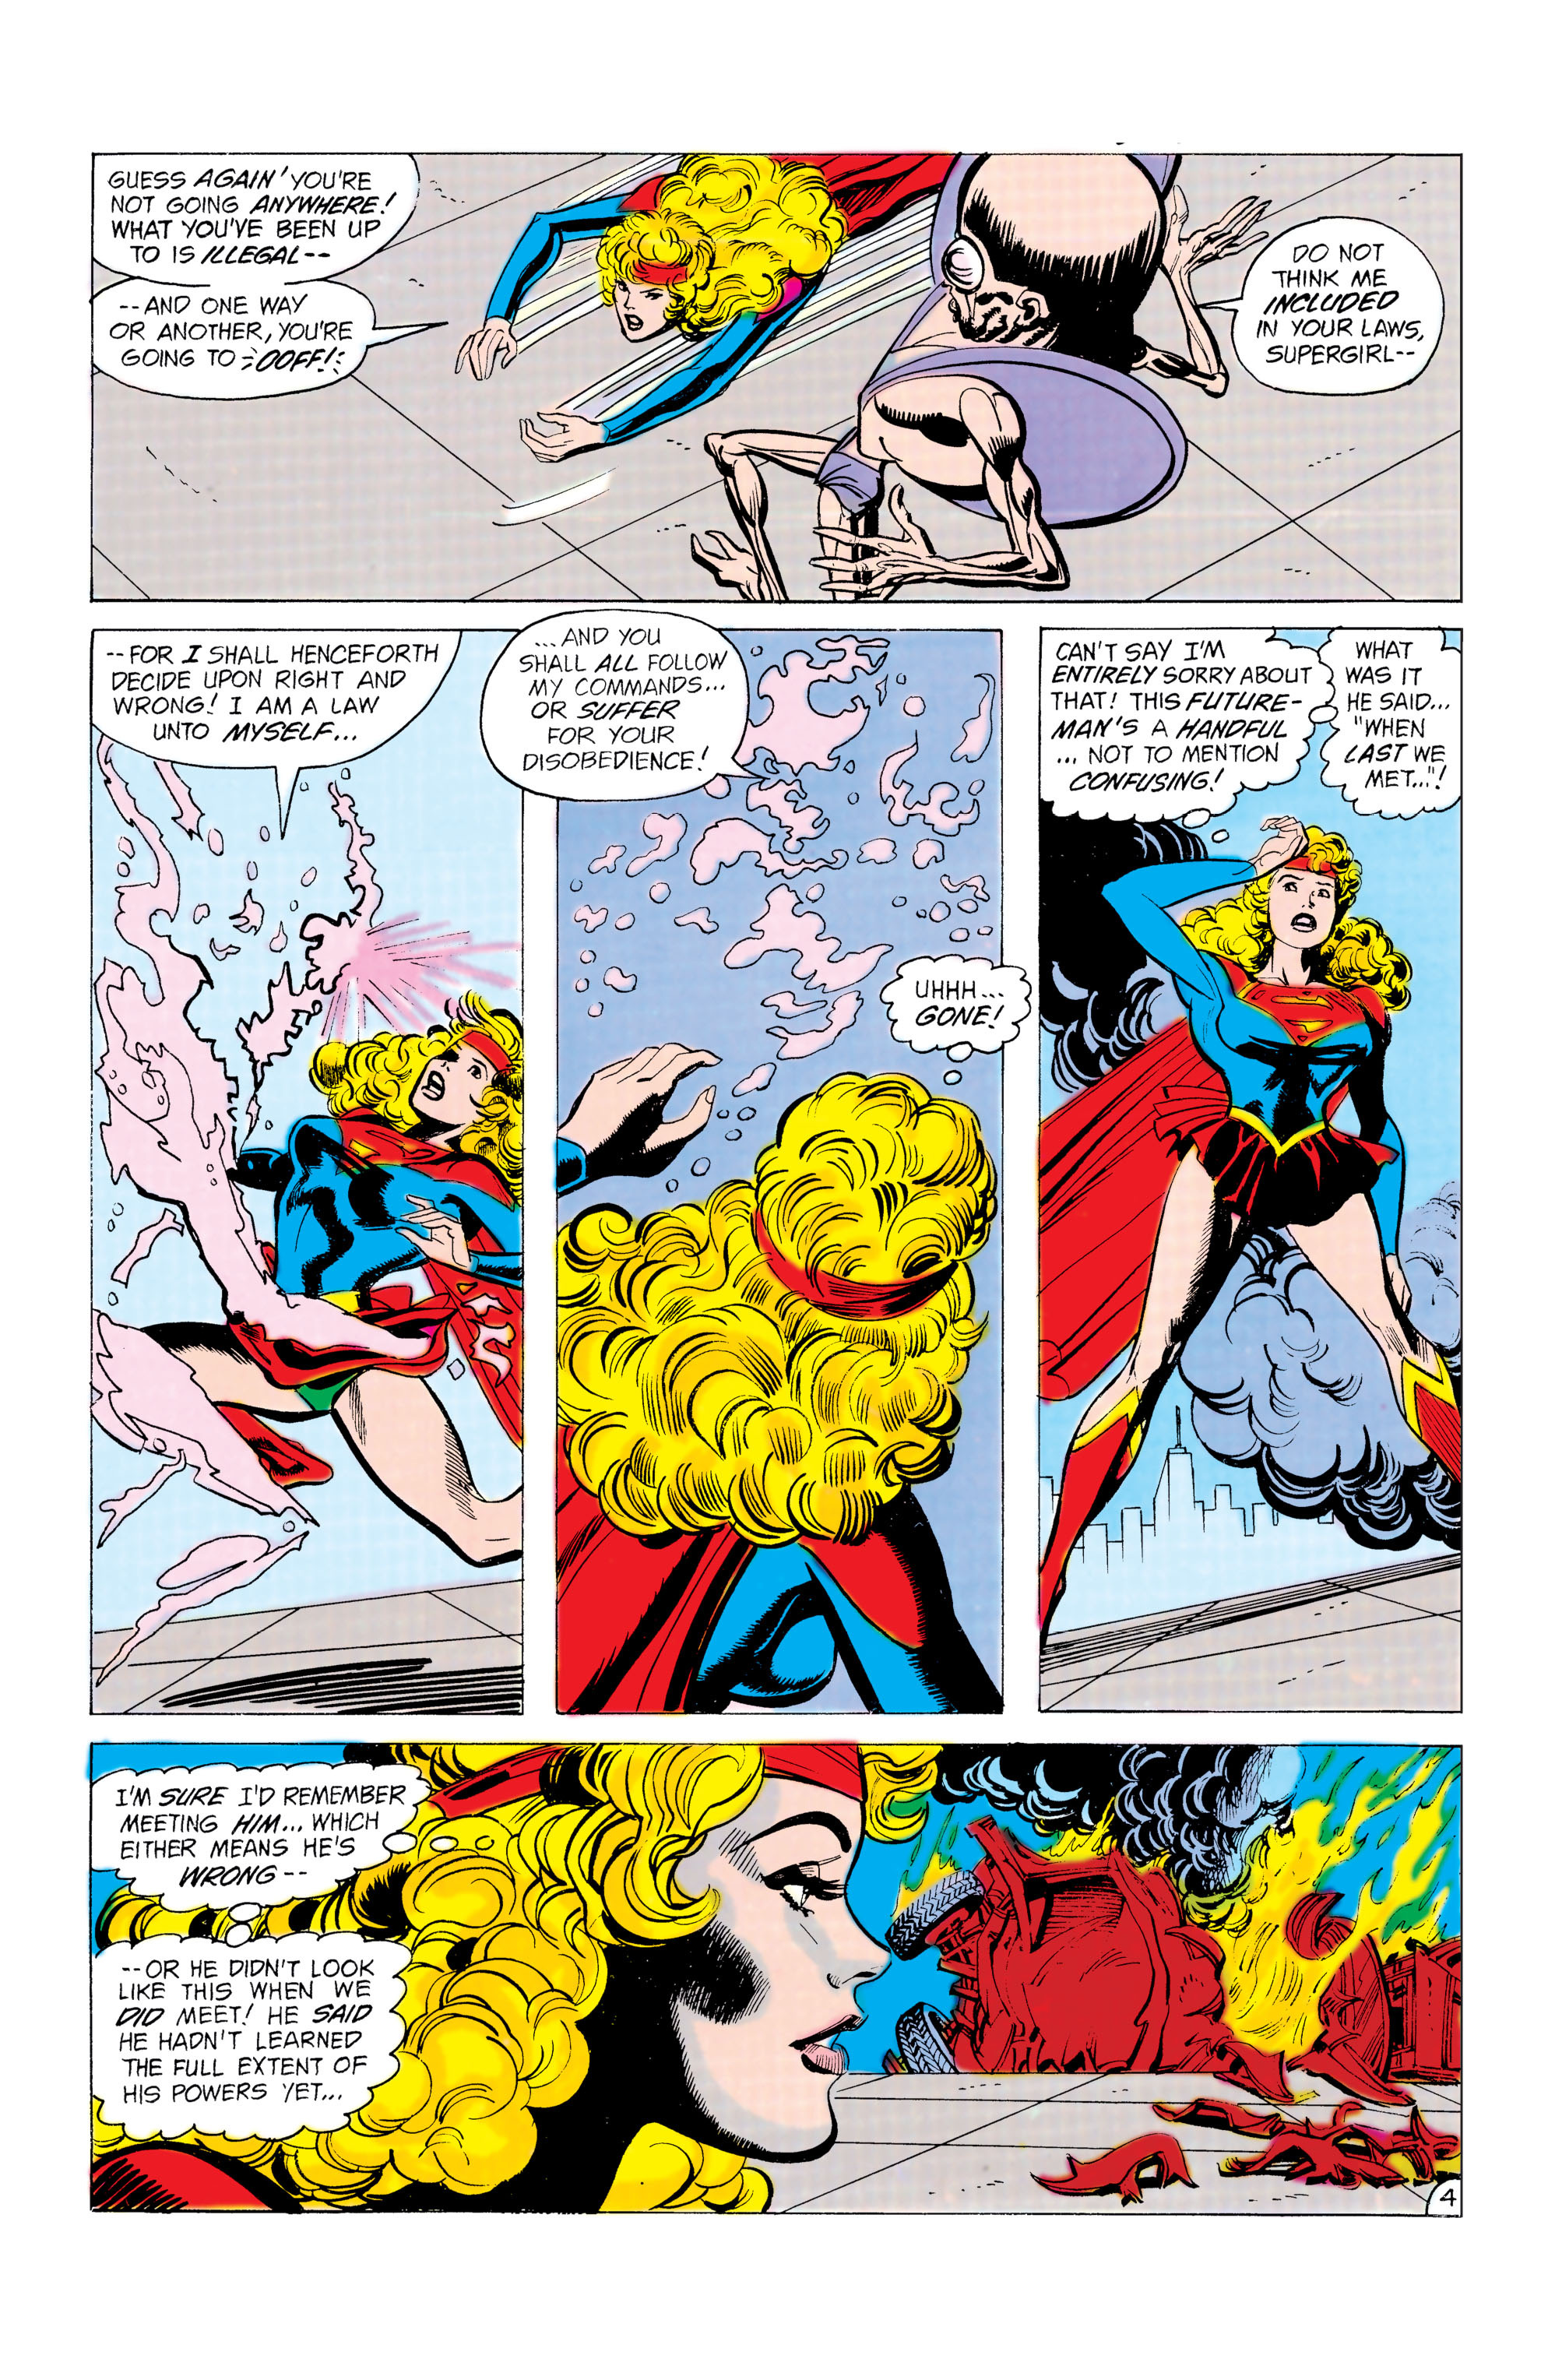 Supergirl (1982) 23 Page 4